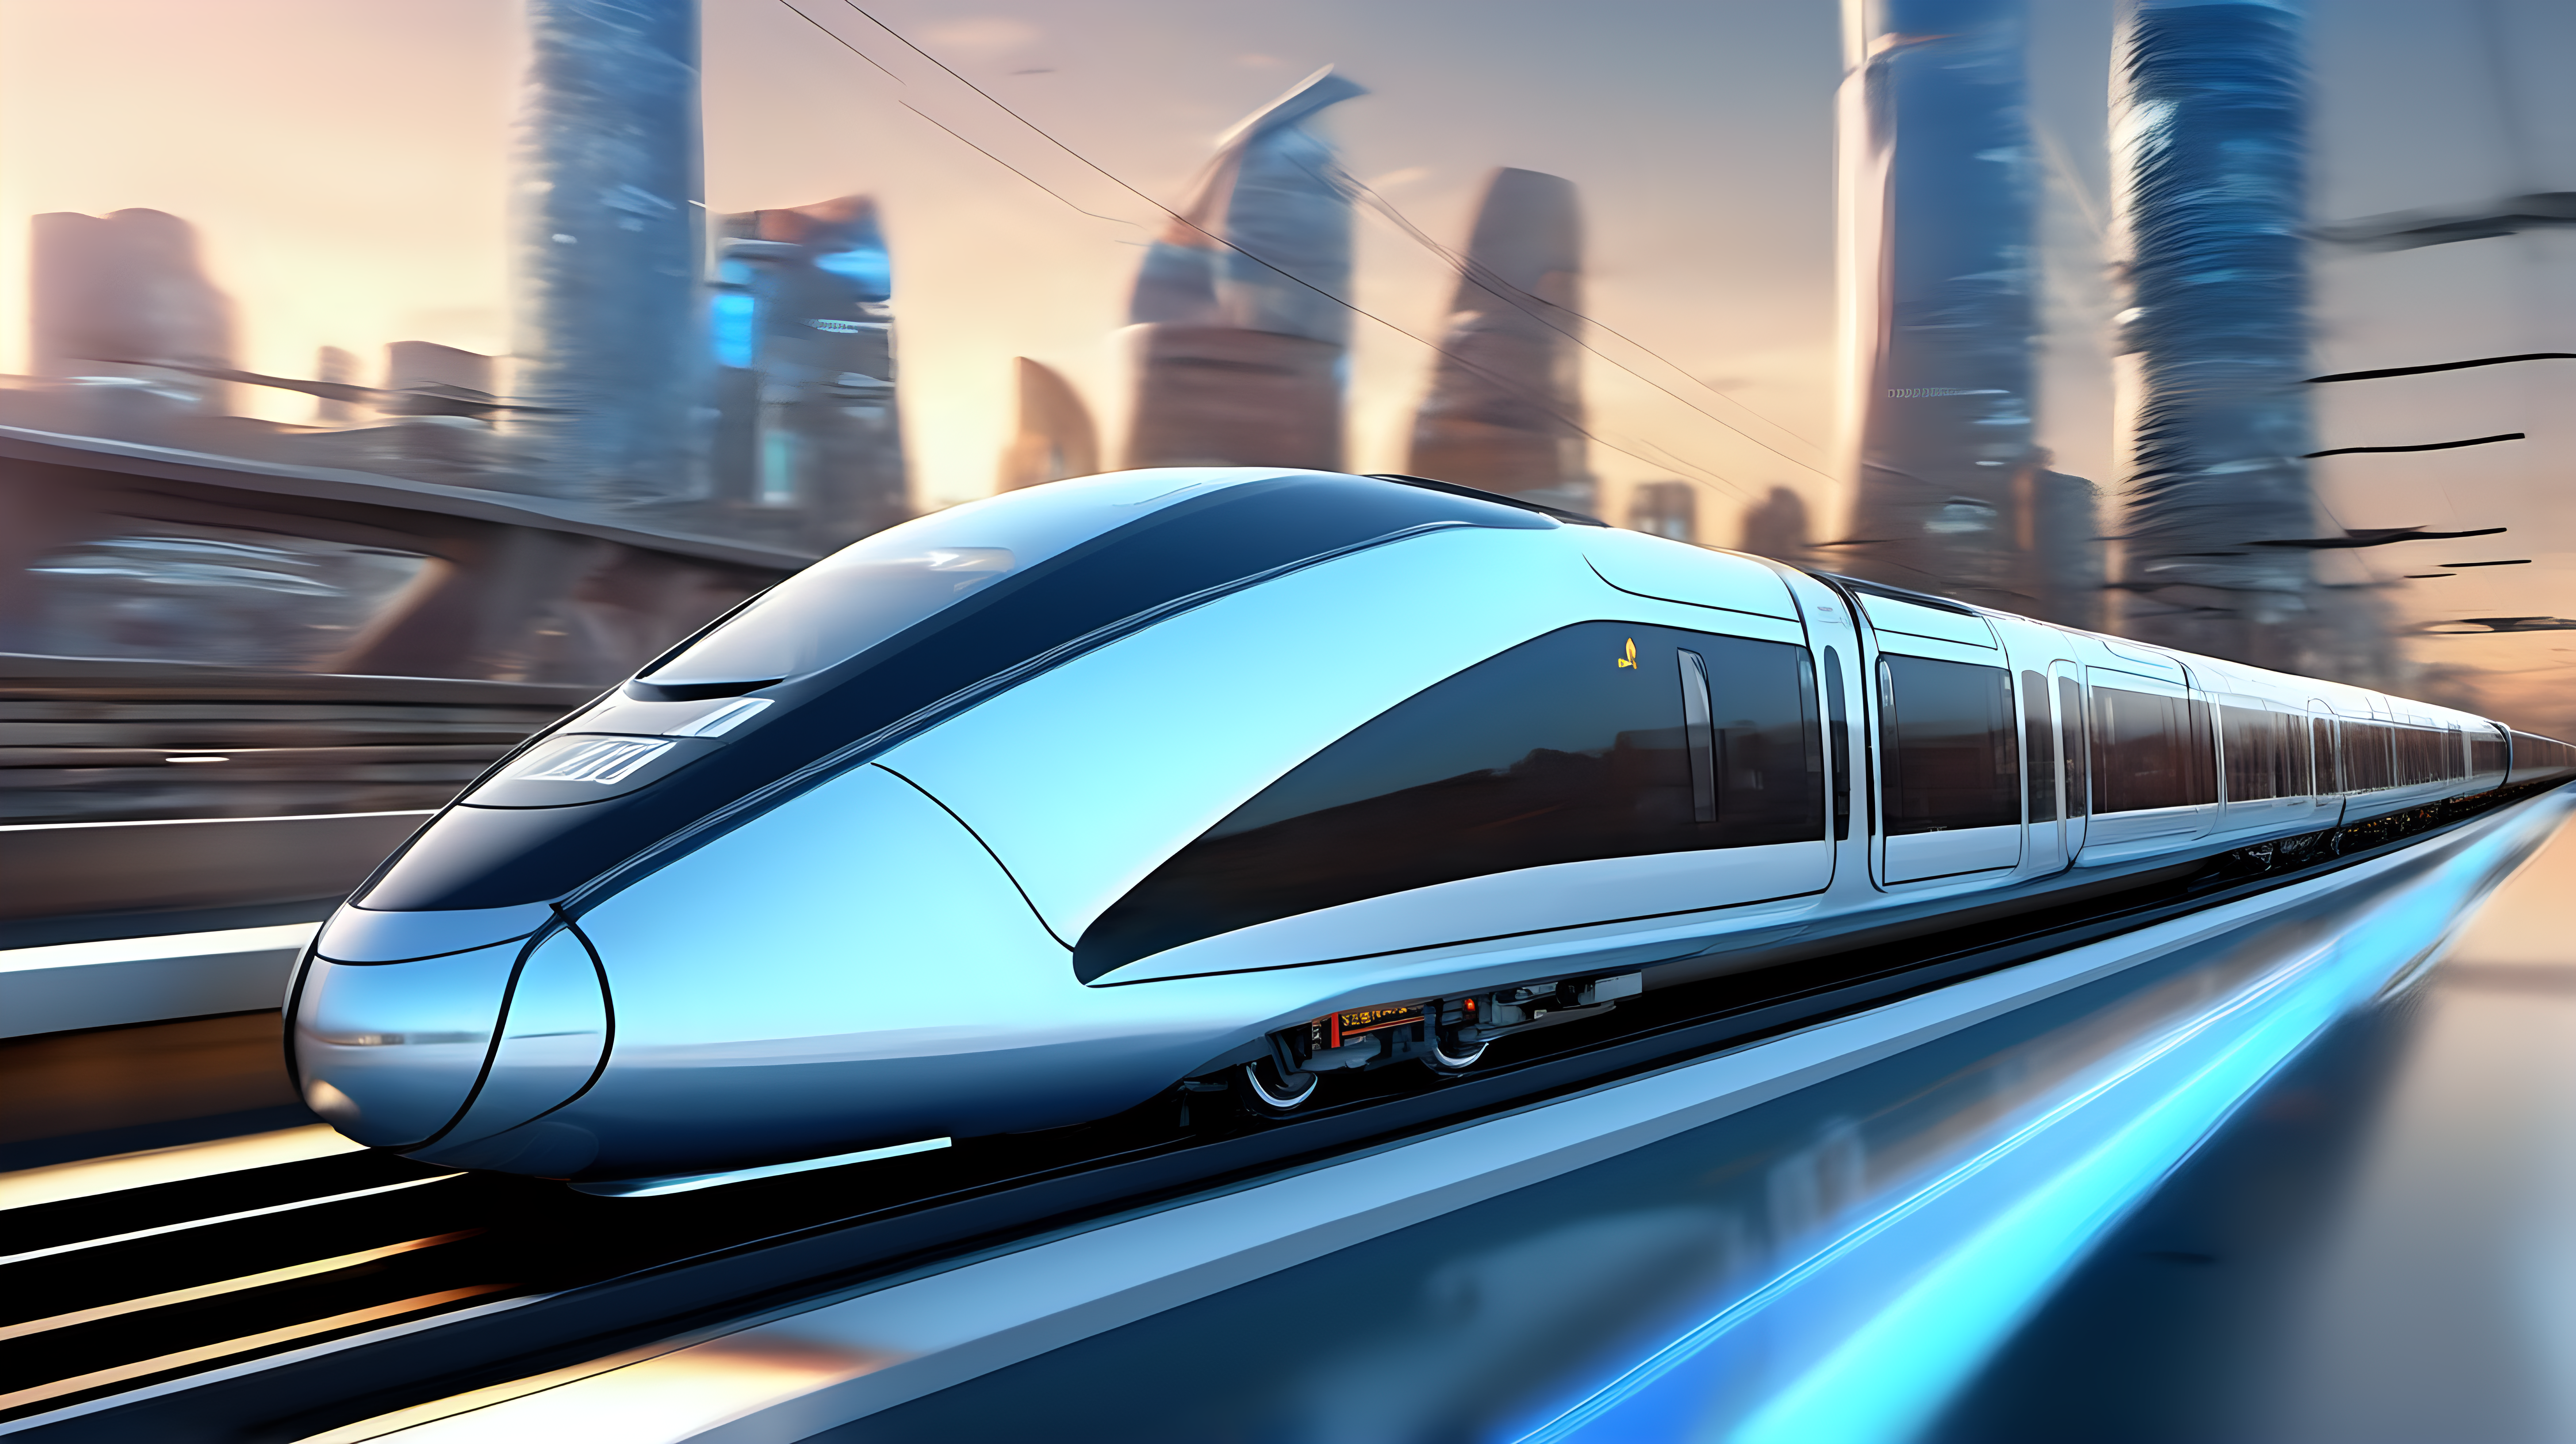 An artistically rendered futuristic train speeding along a high-tech railway track, showcasing cutting-edge design and technology. Futuristic, High-speed, Innovative, Sleek, Technological. Digital illustration or CGI software. dusk with an illuminated futuristic cityscape in the background. Create a dynamic scene featuring a sleek, aerodynamic train gliding on an advanced railway system. The train should display futuristic design elements such as streamlined shapes, high-tech propulsion systems, and innovative aesthetics. Emphasize speed and innovation while maintaining a sense of realism in the depiction.  Utilize digital illustration techniques to render a visually captivating and technically advanced futuristic train. Incorporate modern cityscapes or landscapes to contextualize the train's futuristic setting, emphasizing its role in a technologically advanced environment.